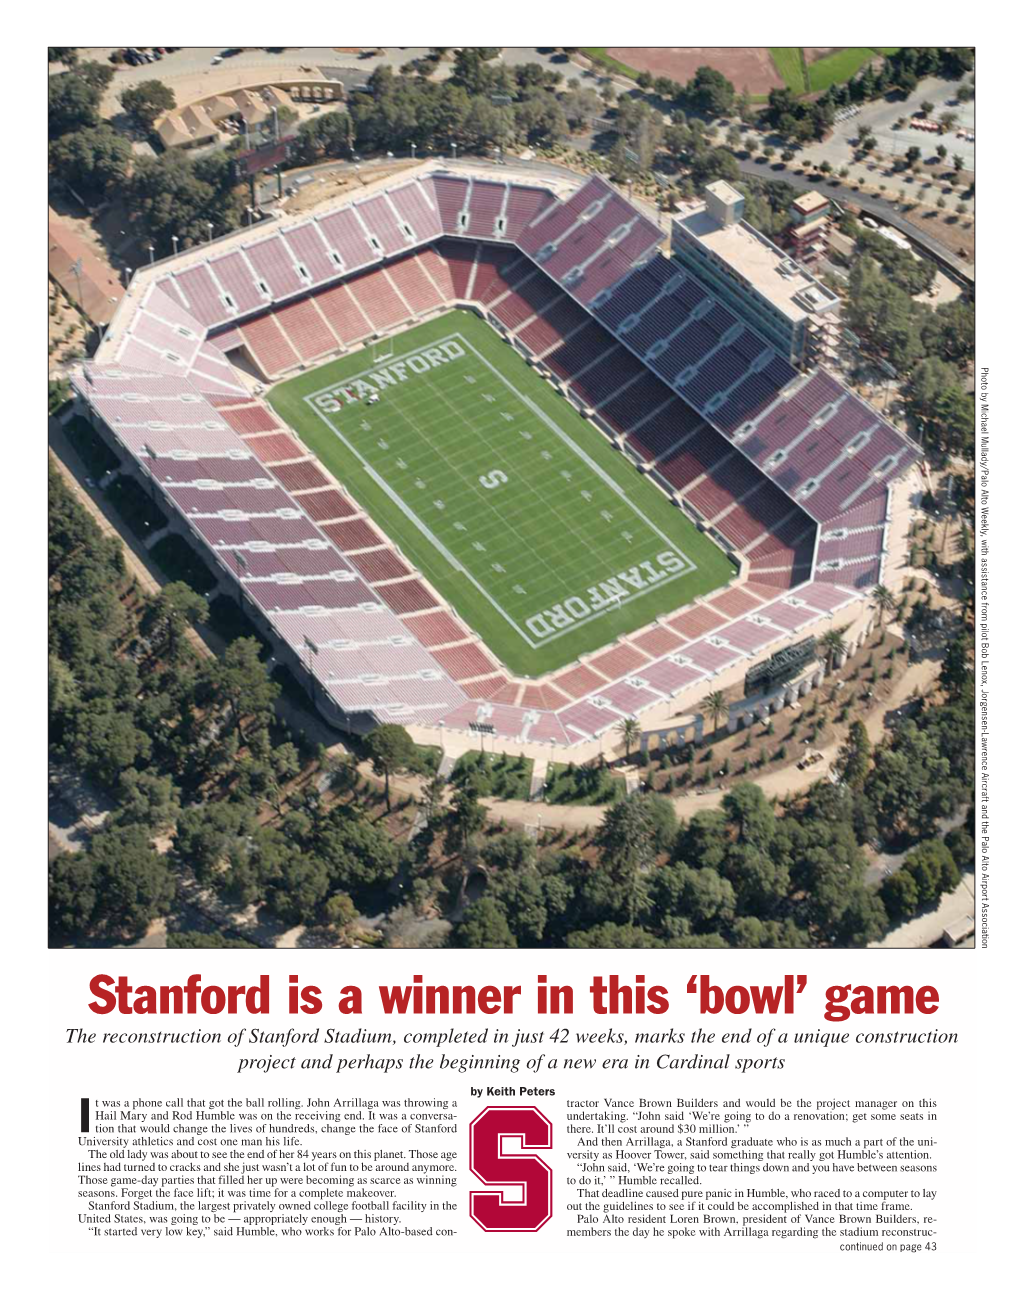 Stanford Stadium, Completed in Just 42 Weeks, Marks the End of a Unique Construction Project and Perhaps the Beginning of a New Era in Cardinal Sports